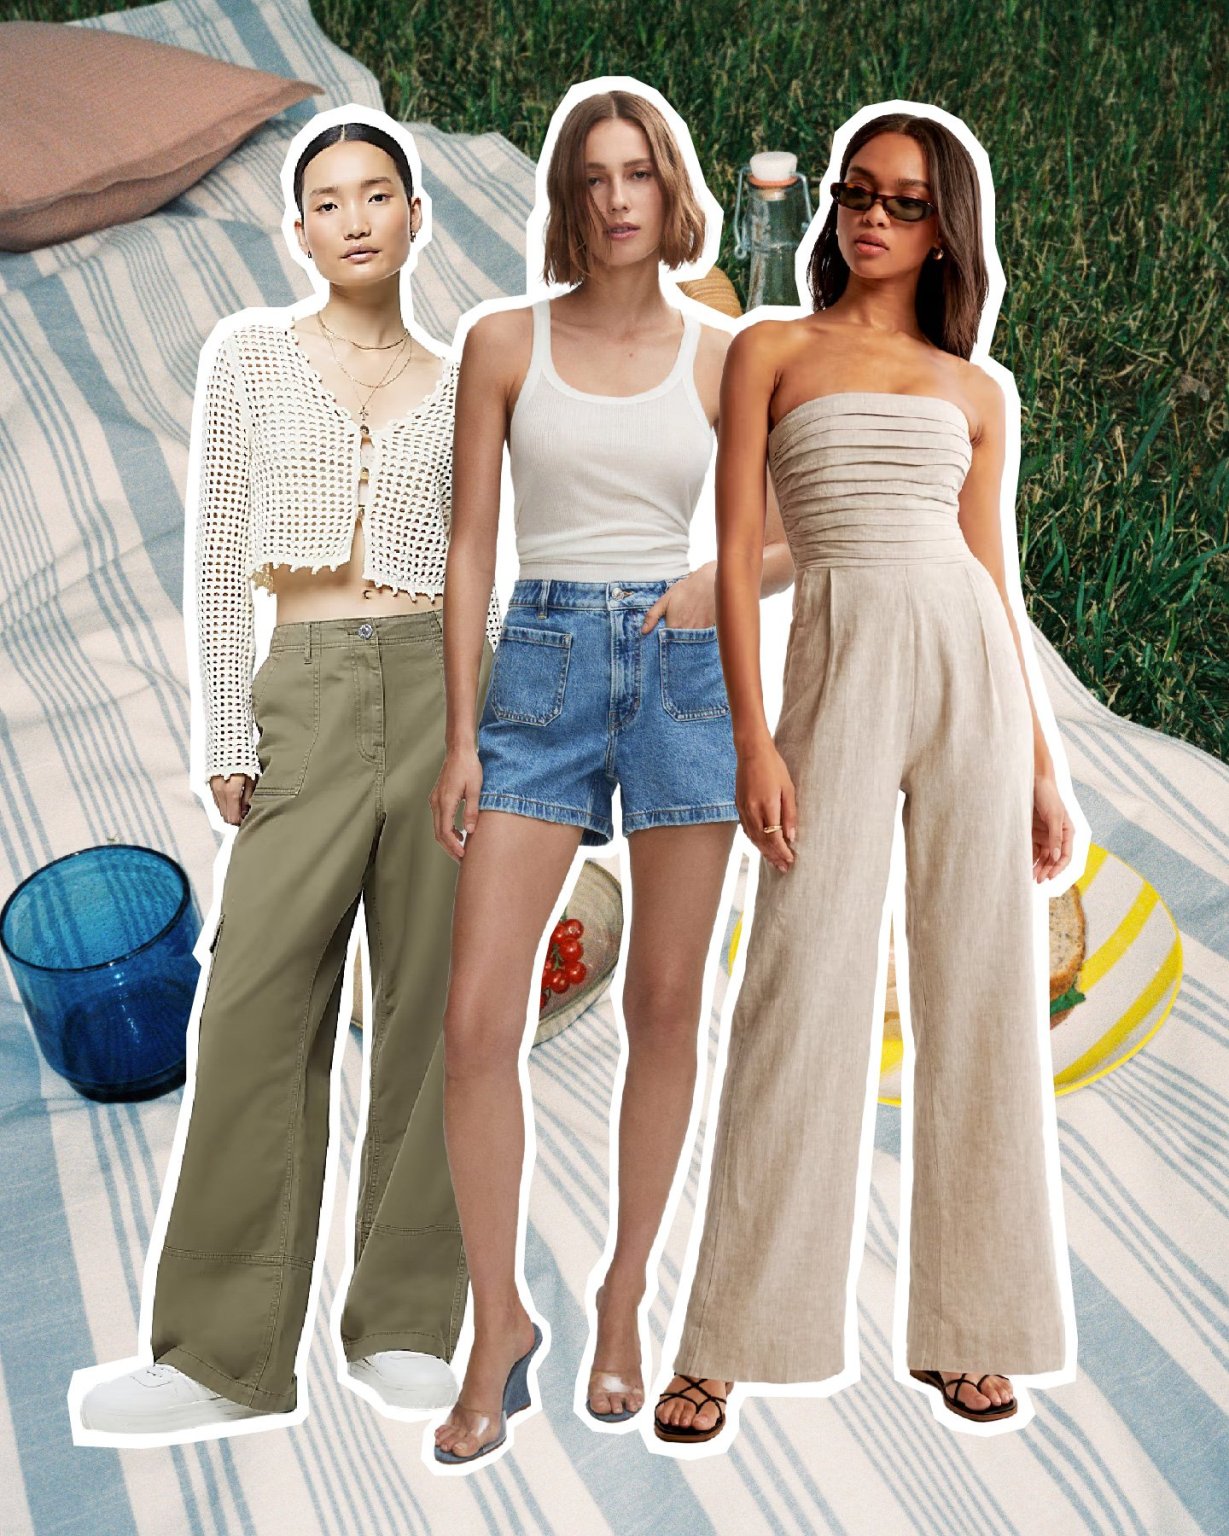 How To Look Stylish And Comfortable At A Summer Picnic: Outfit Ideas